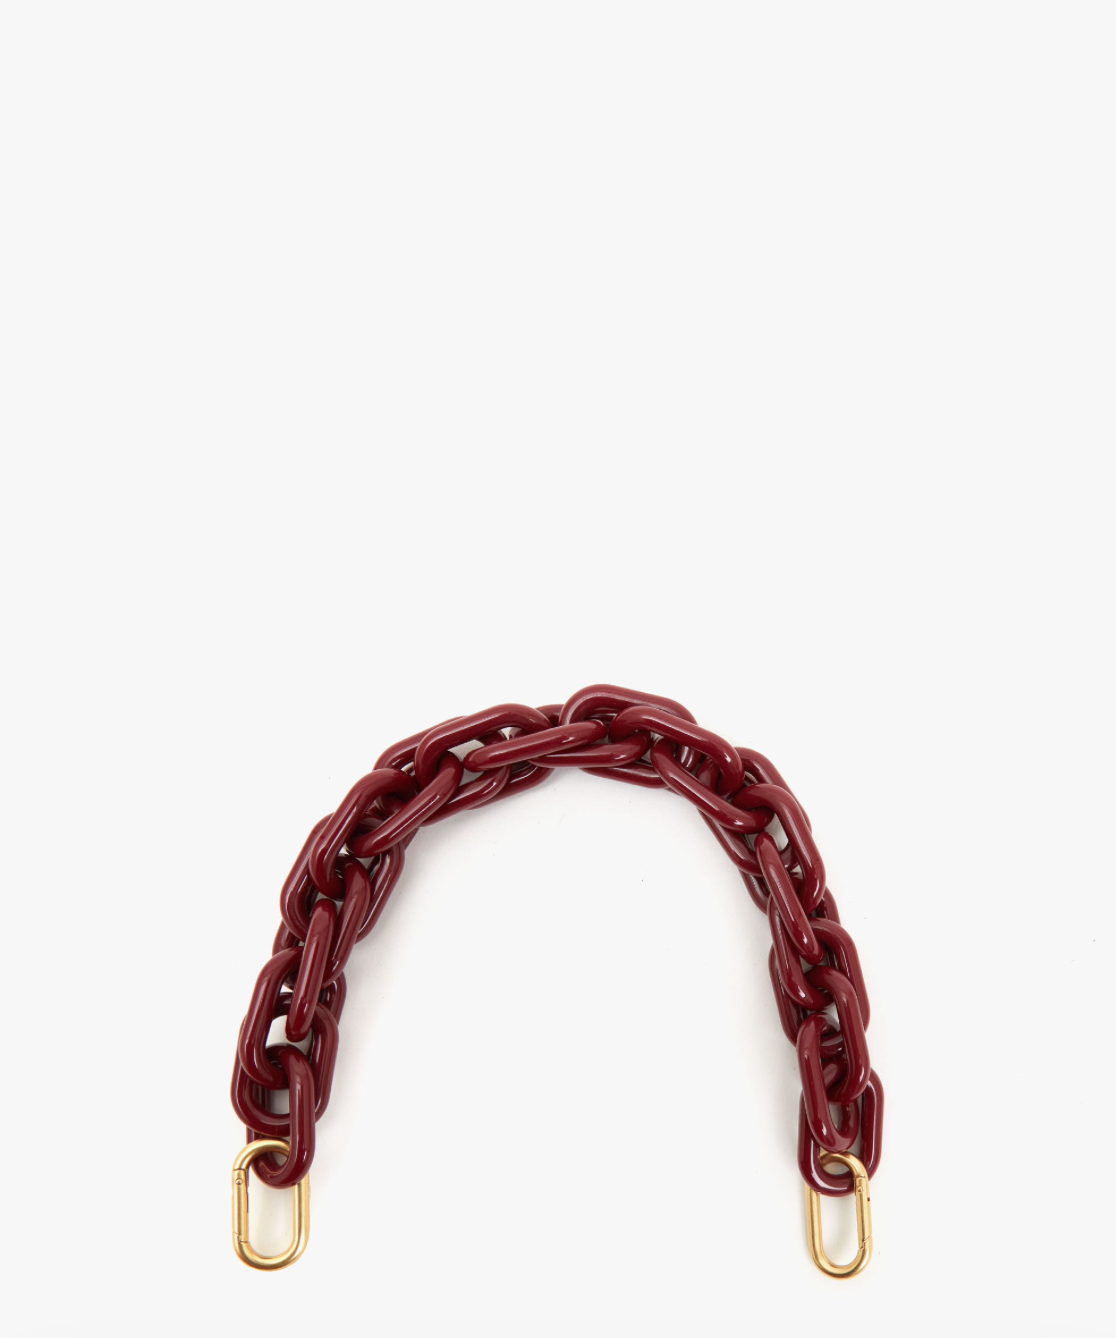 Clare V, Bags, Clare V Braided Leather Bag Strap In Red